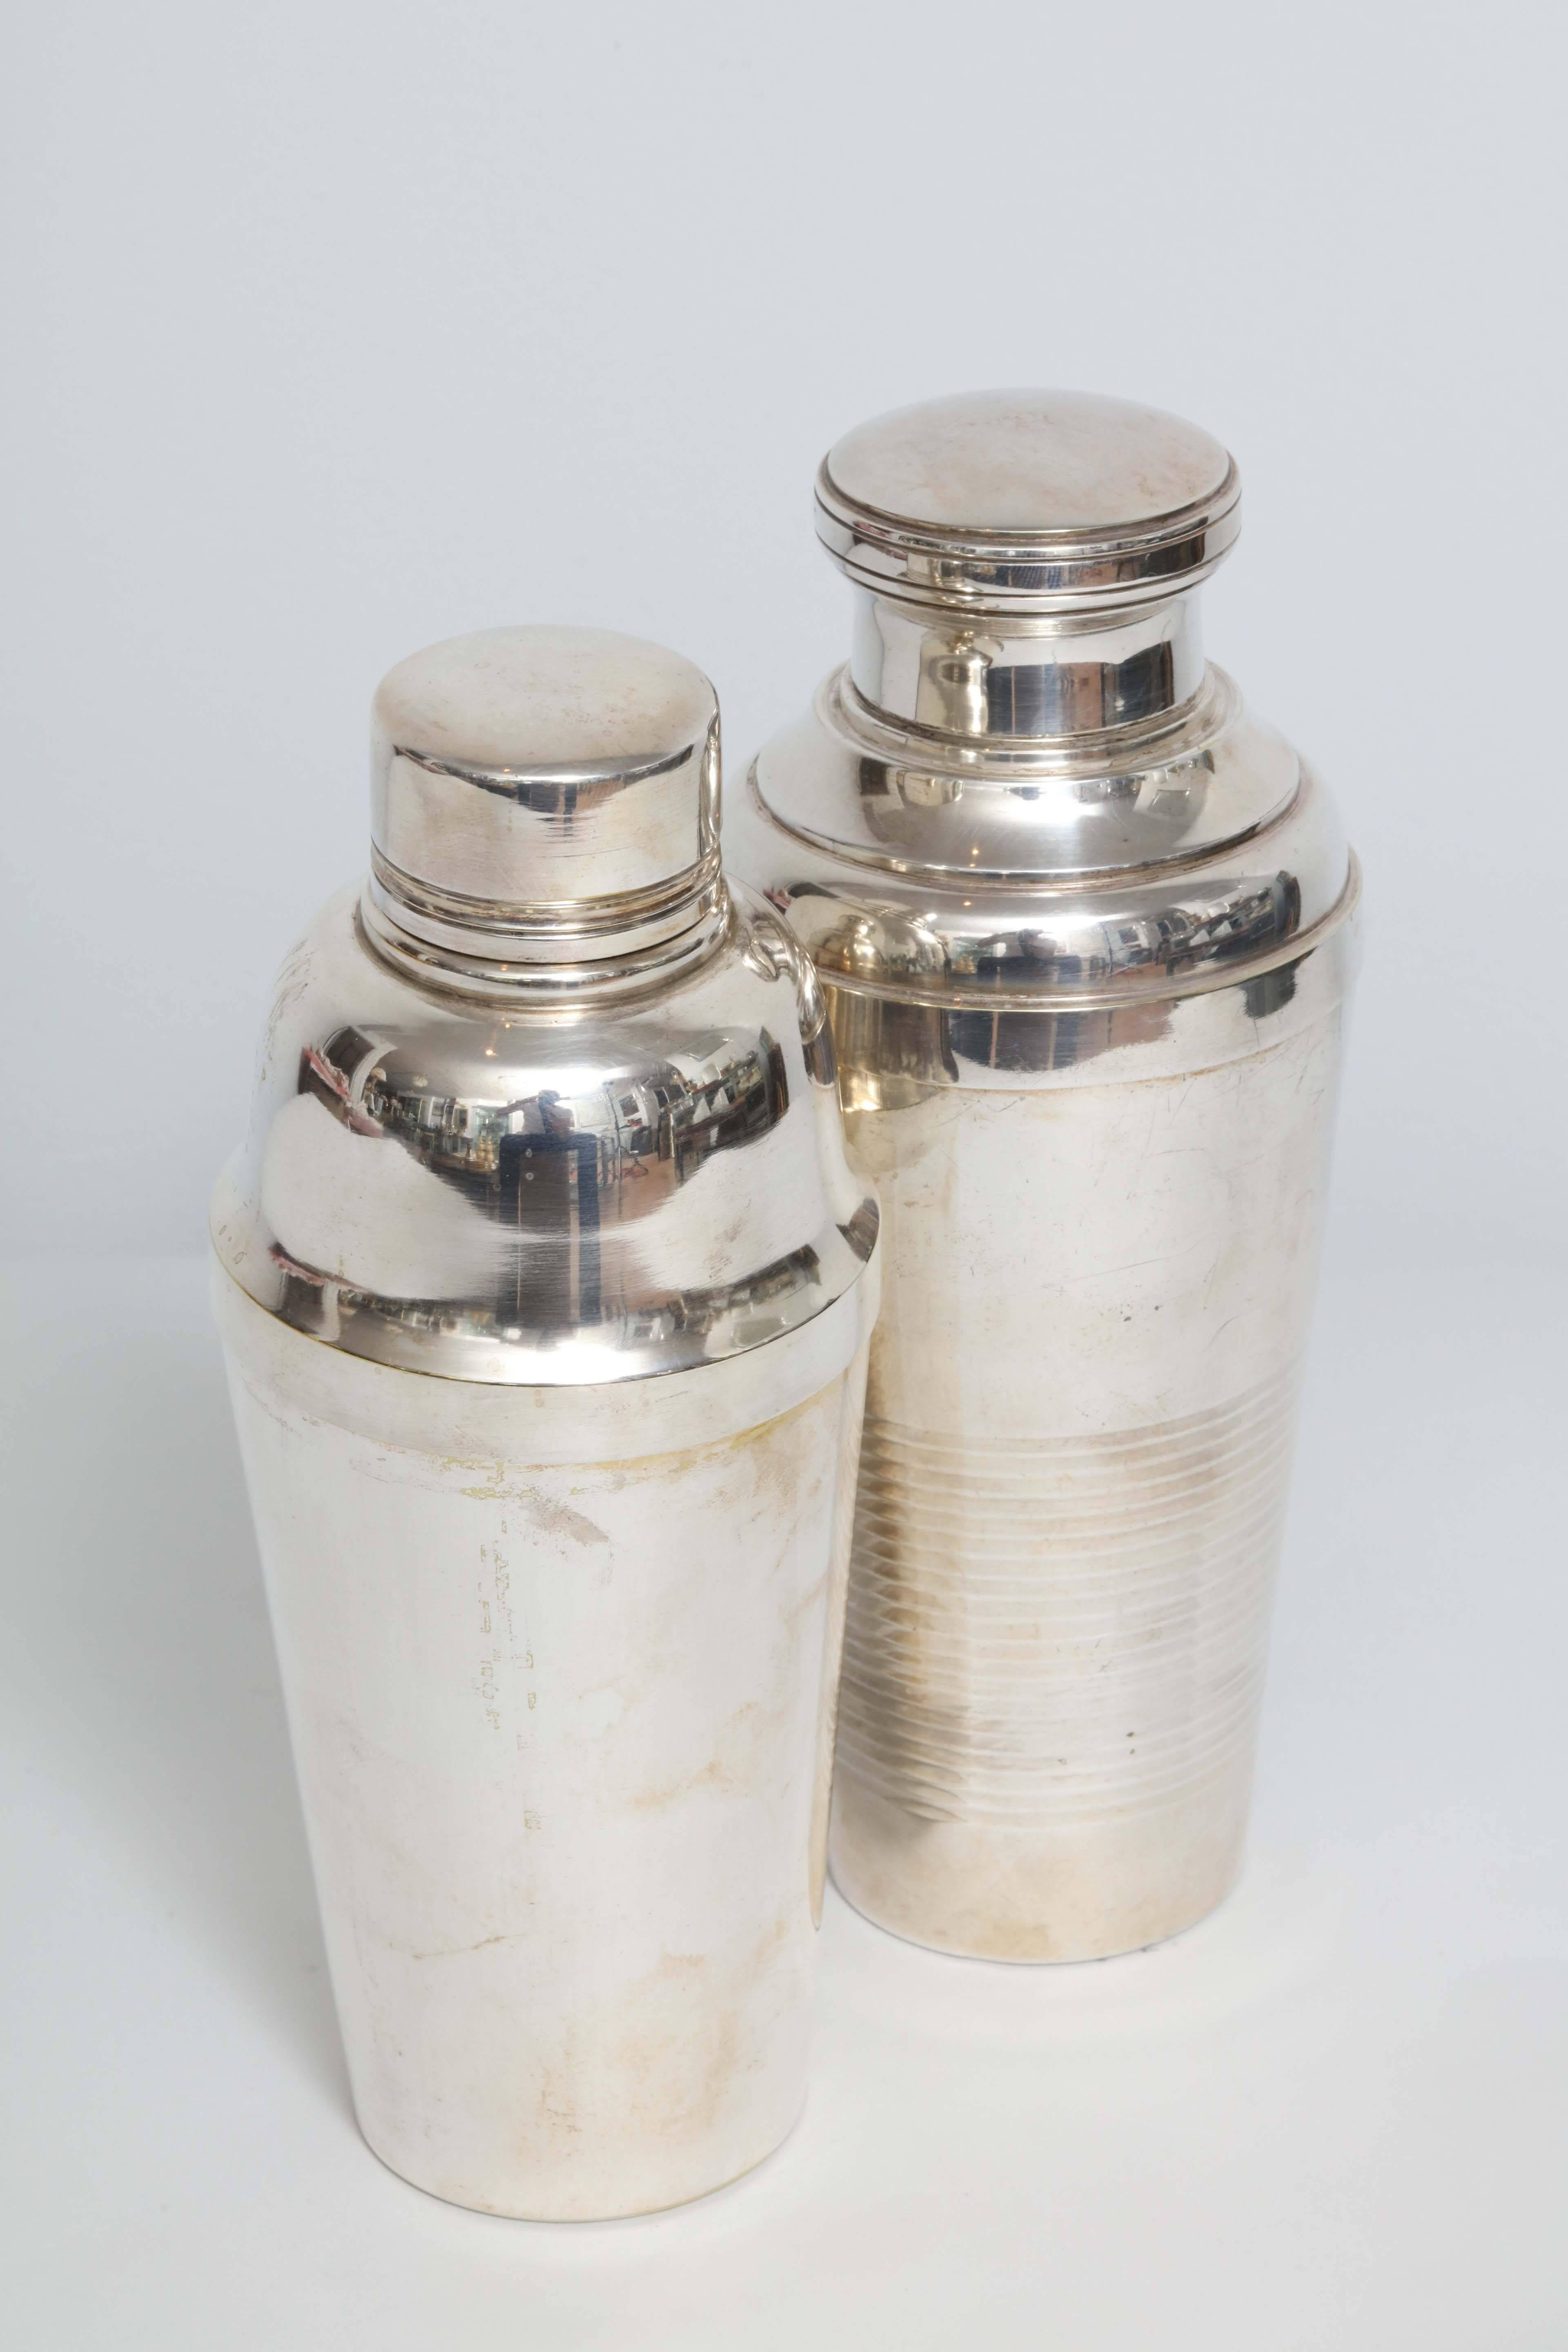 These vintage French cocktail shakers are a classic design and fine quality silver plate by the prestigious
French maker Christofle. They are complete with the slotted strainer to keep the ice from entering the drink.
A great bar necessity.